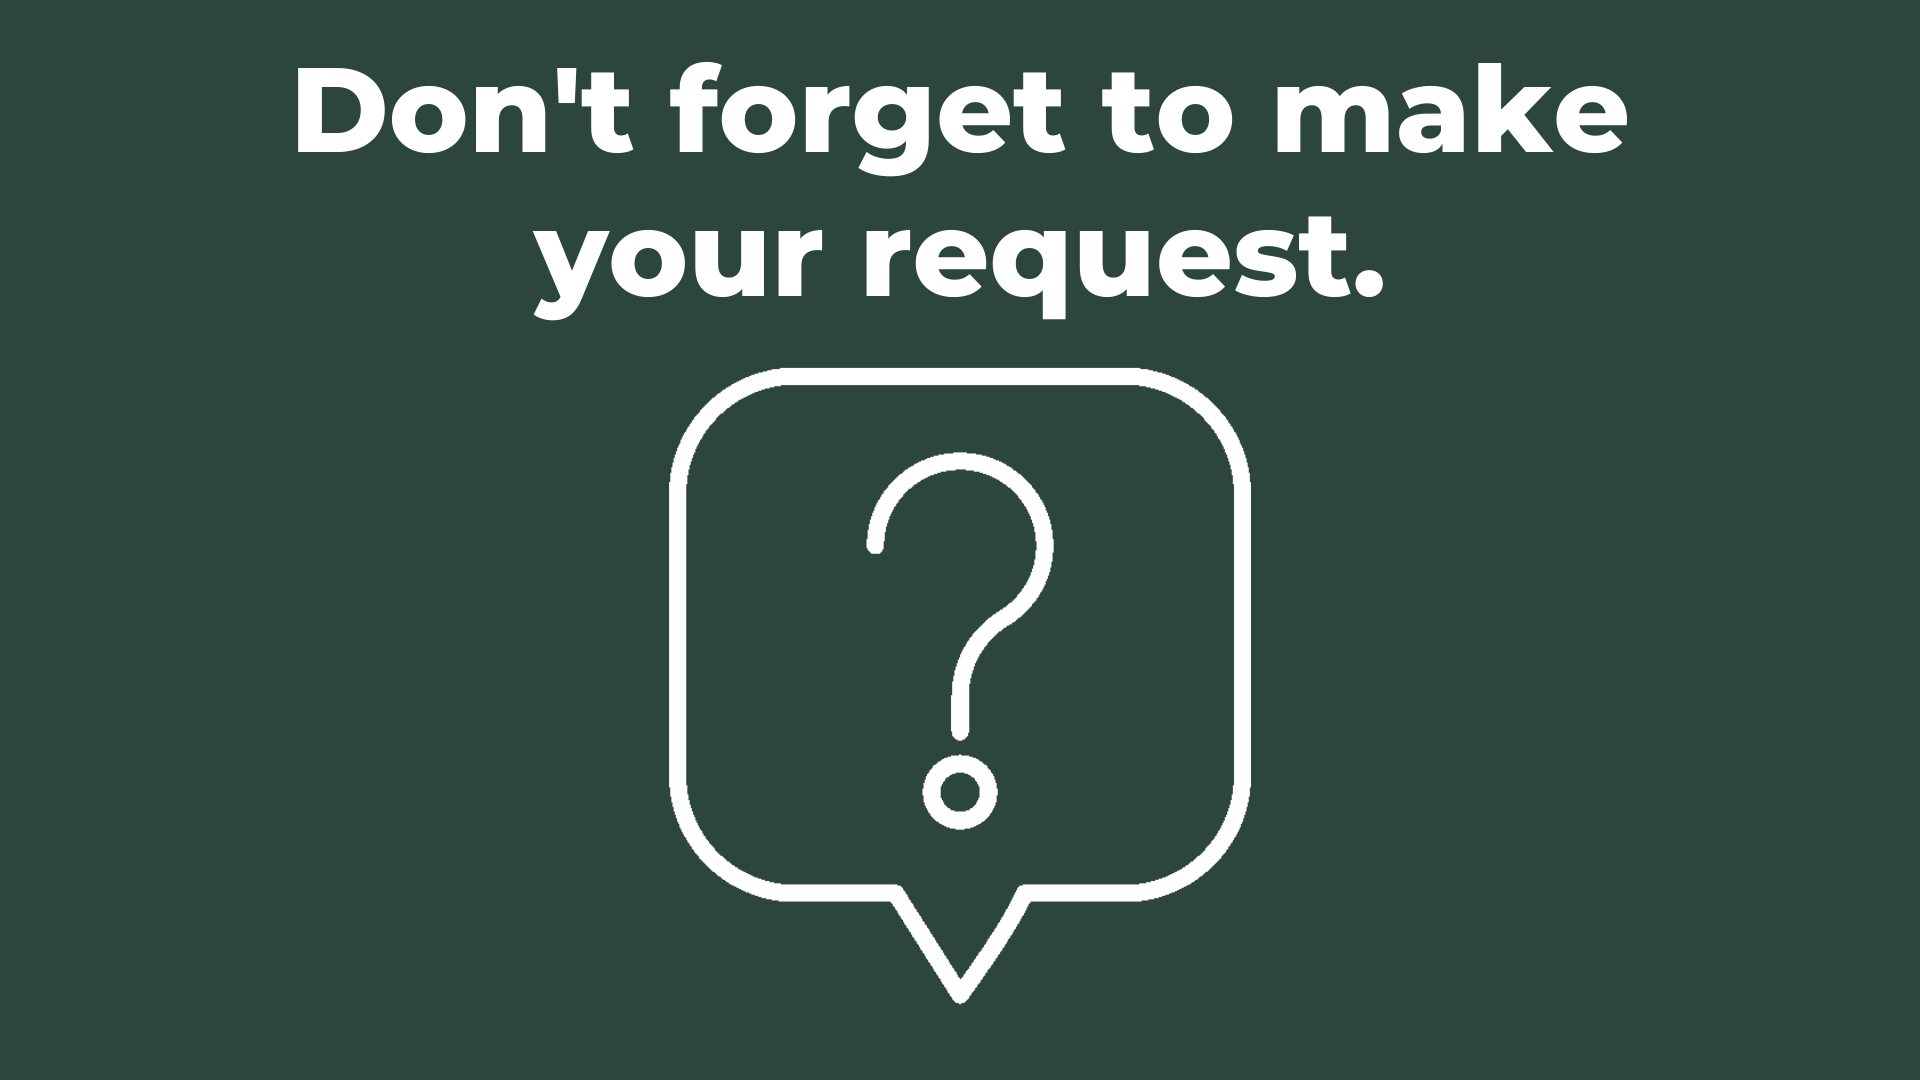 Slide reminding presenters to make a request.